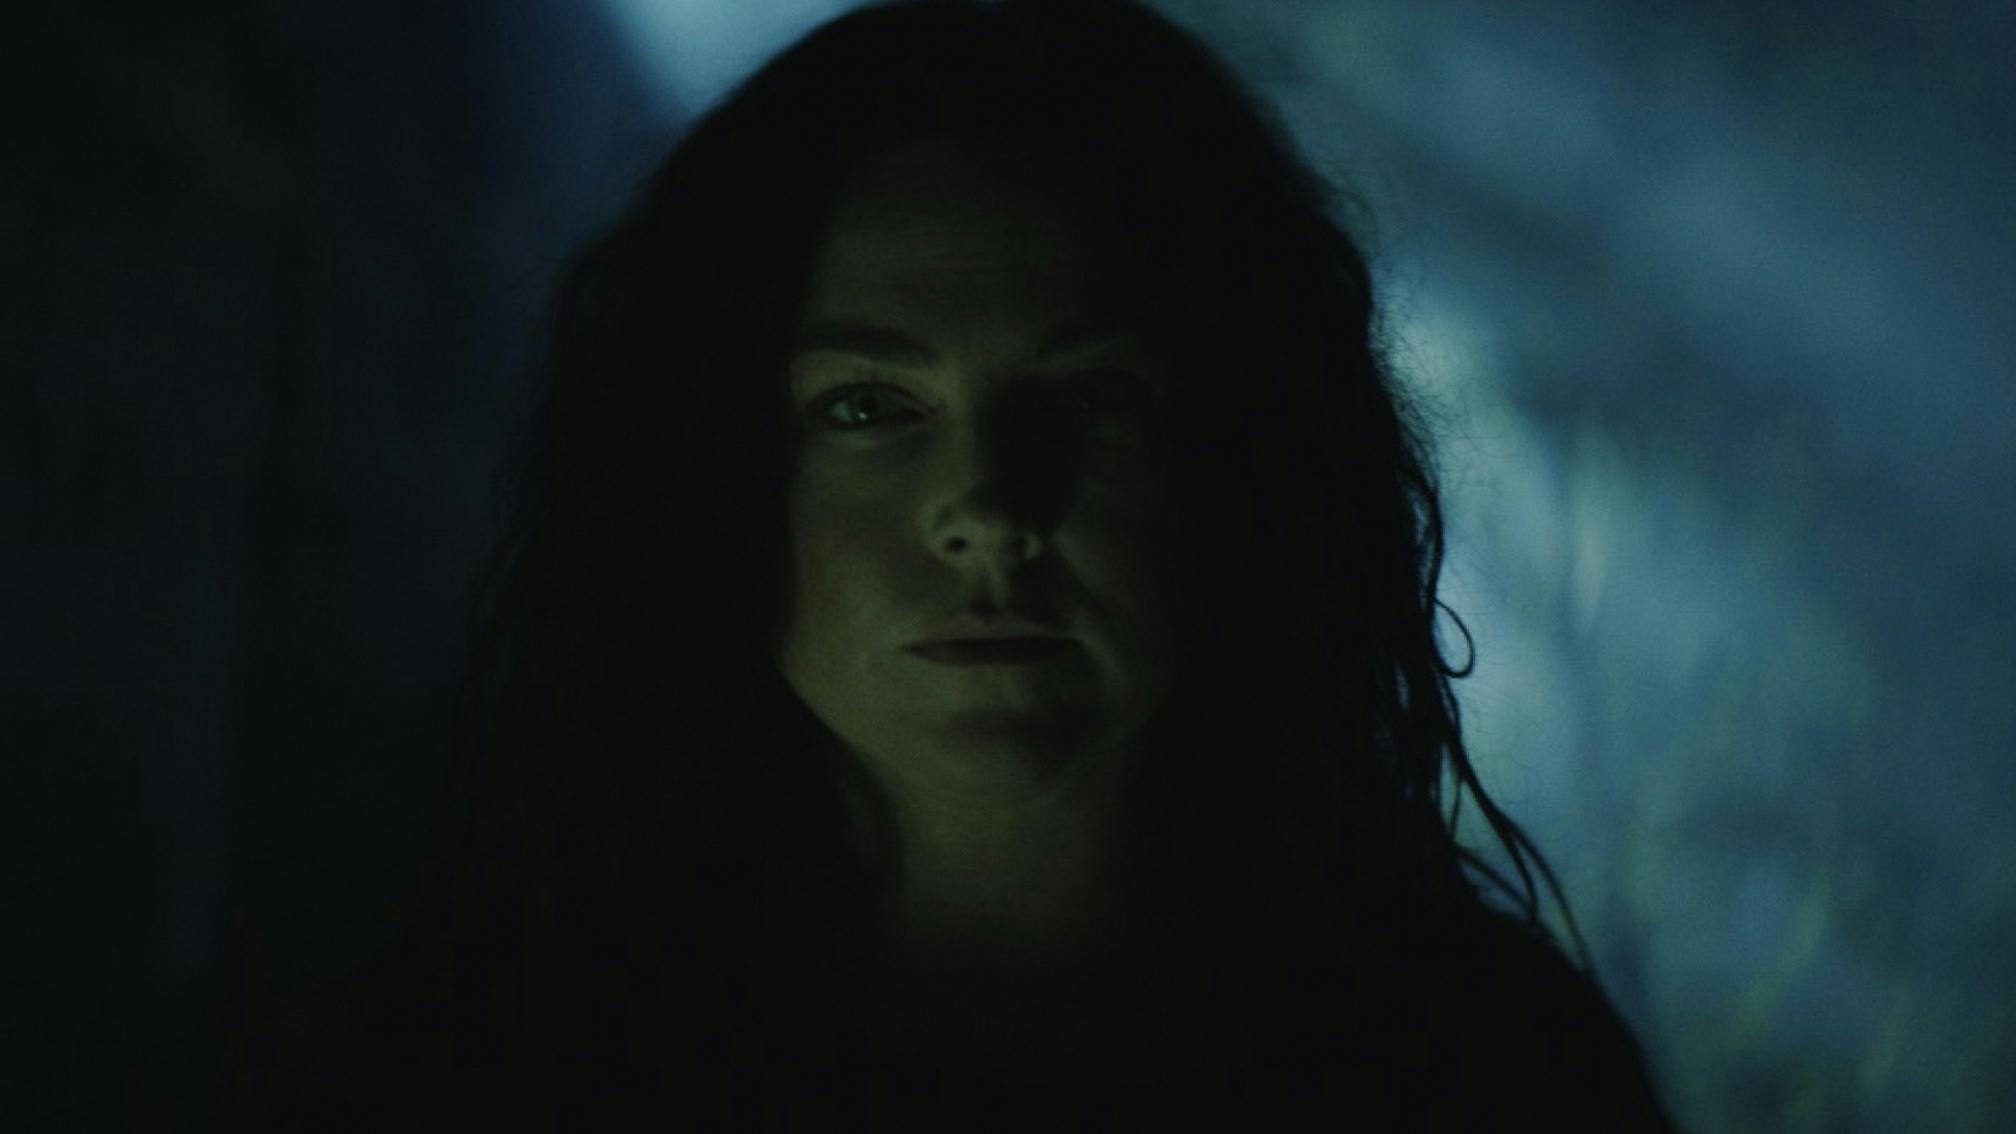 Watch Evanescence's New Video For Use My Voice